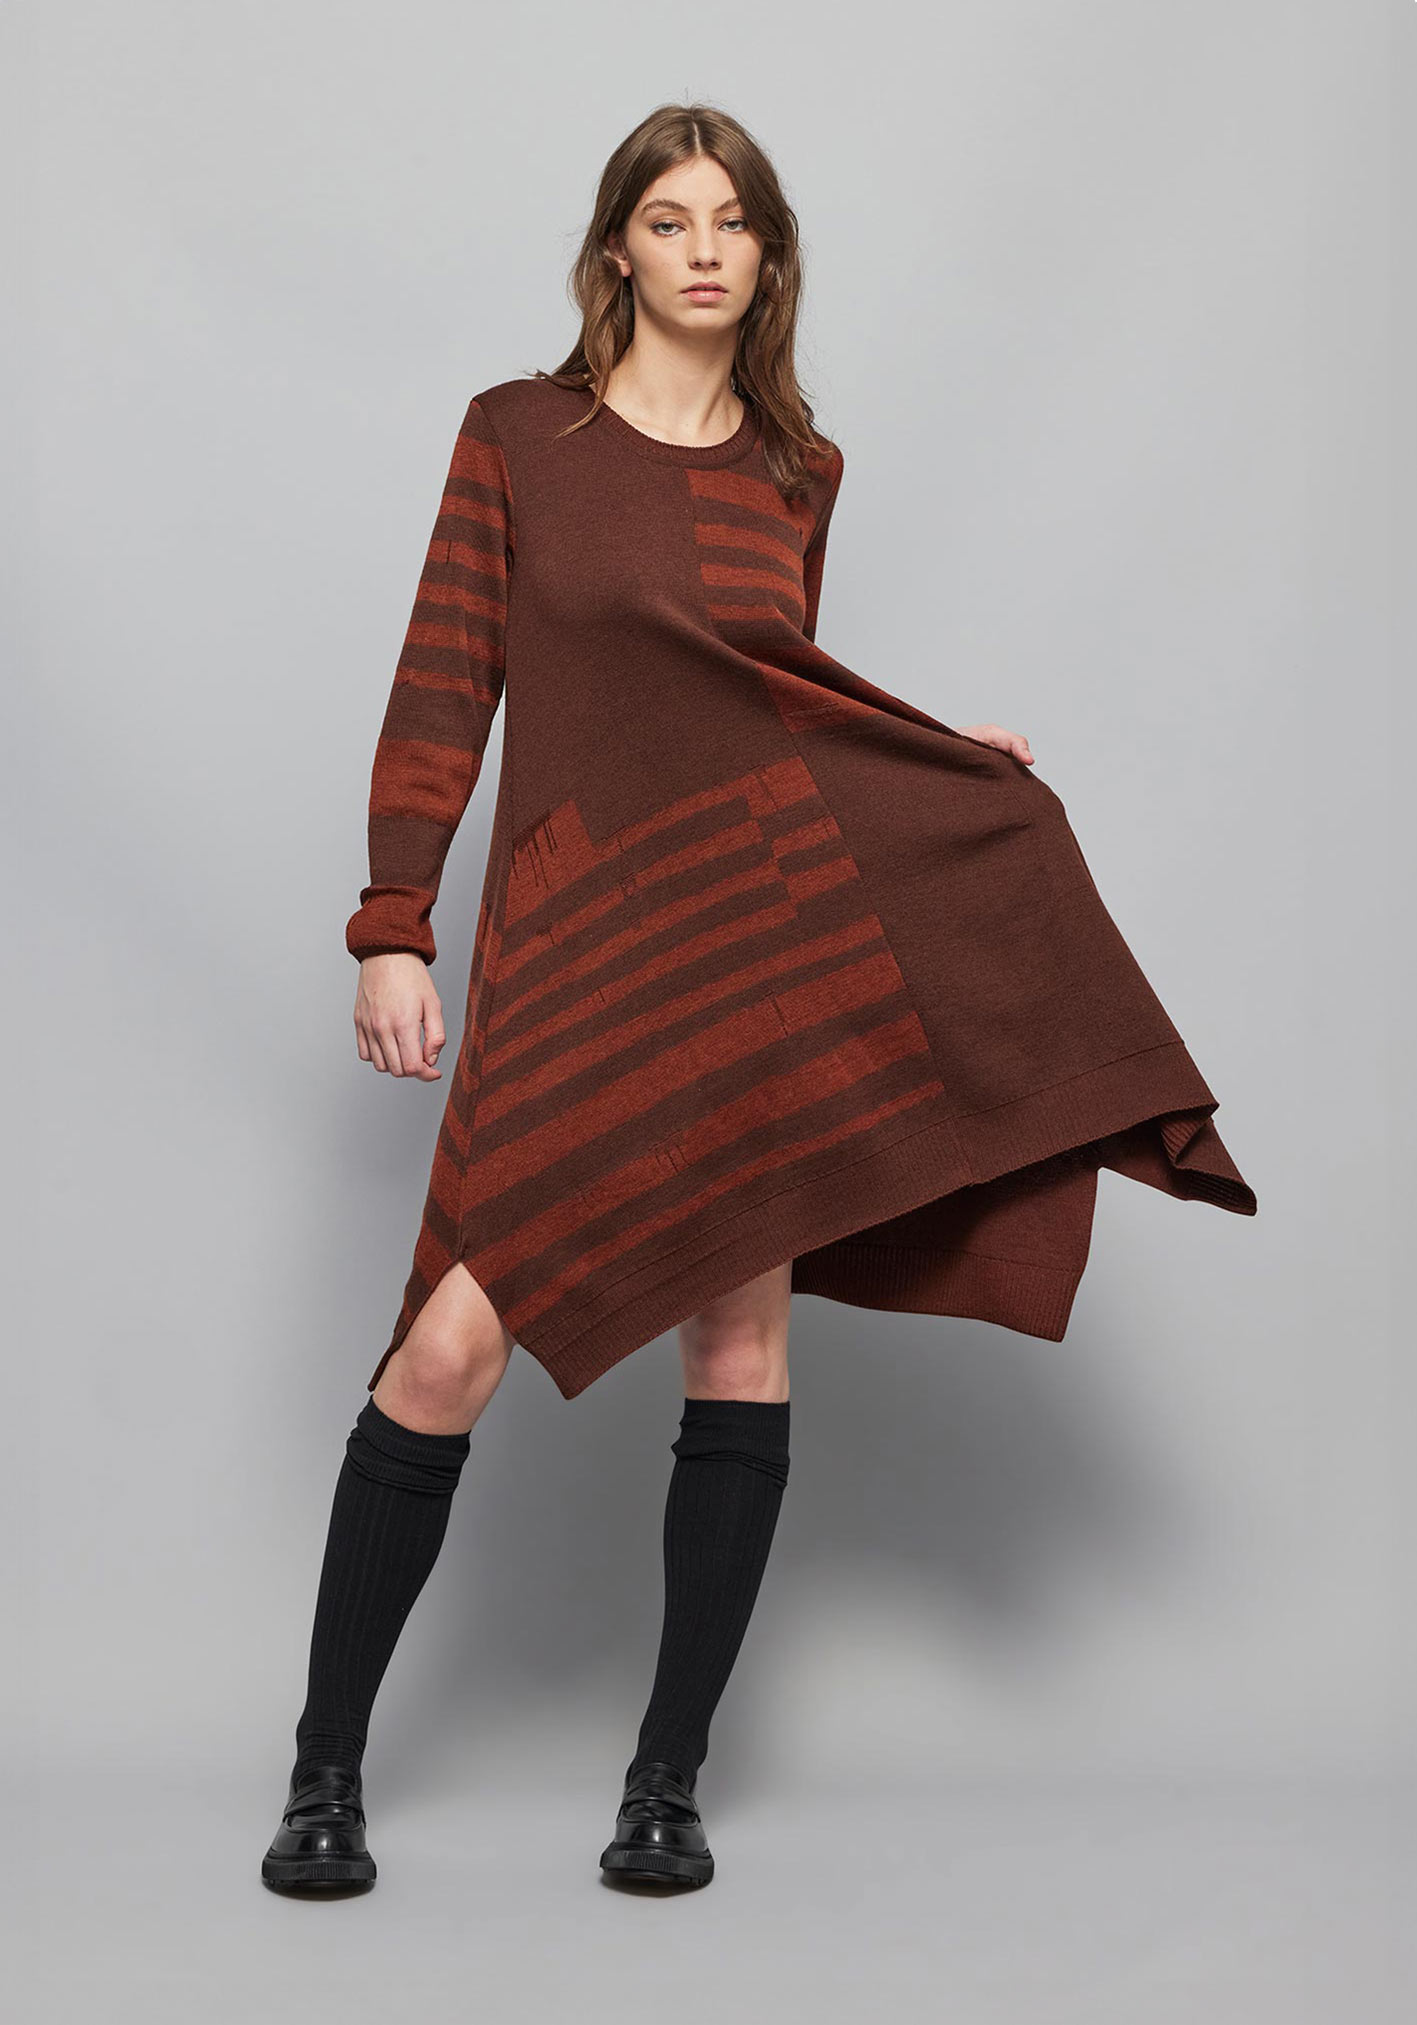 buy the latest Align Tunic Dress online